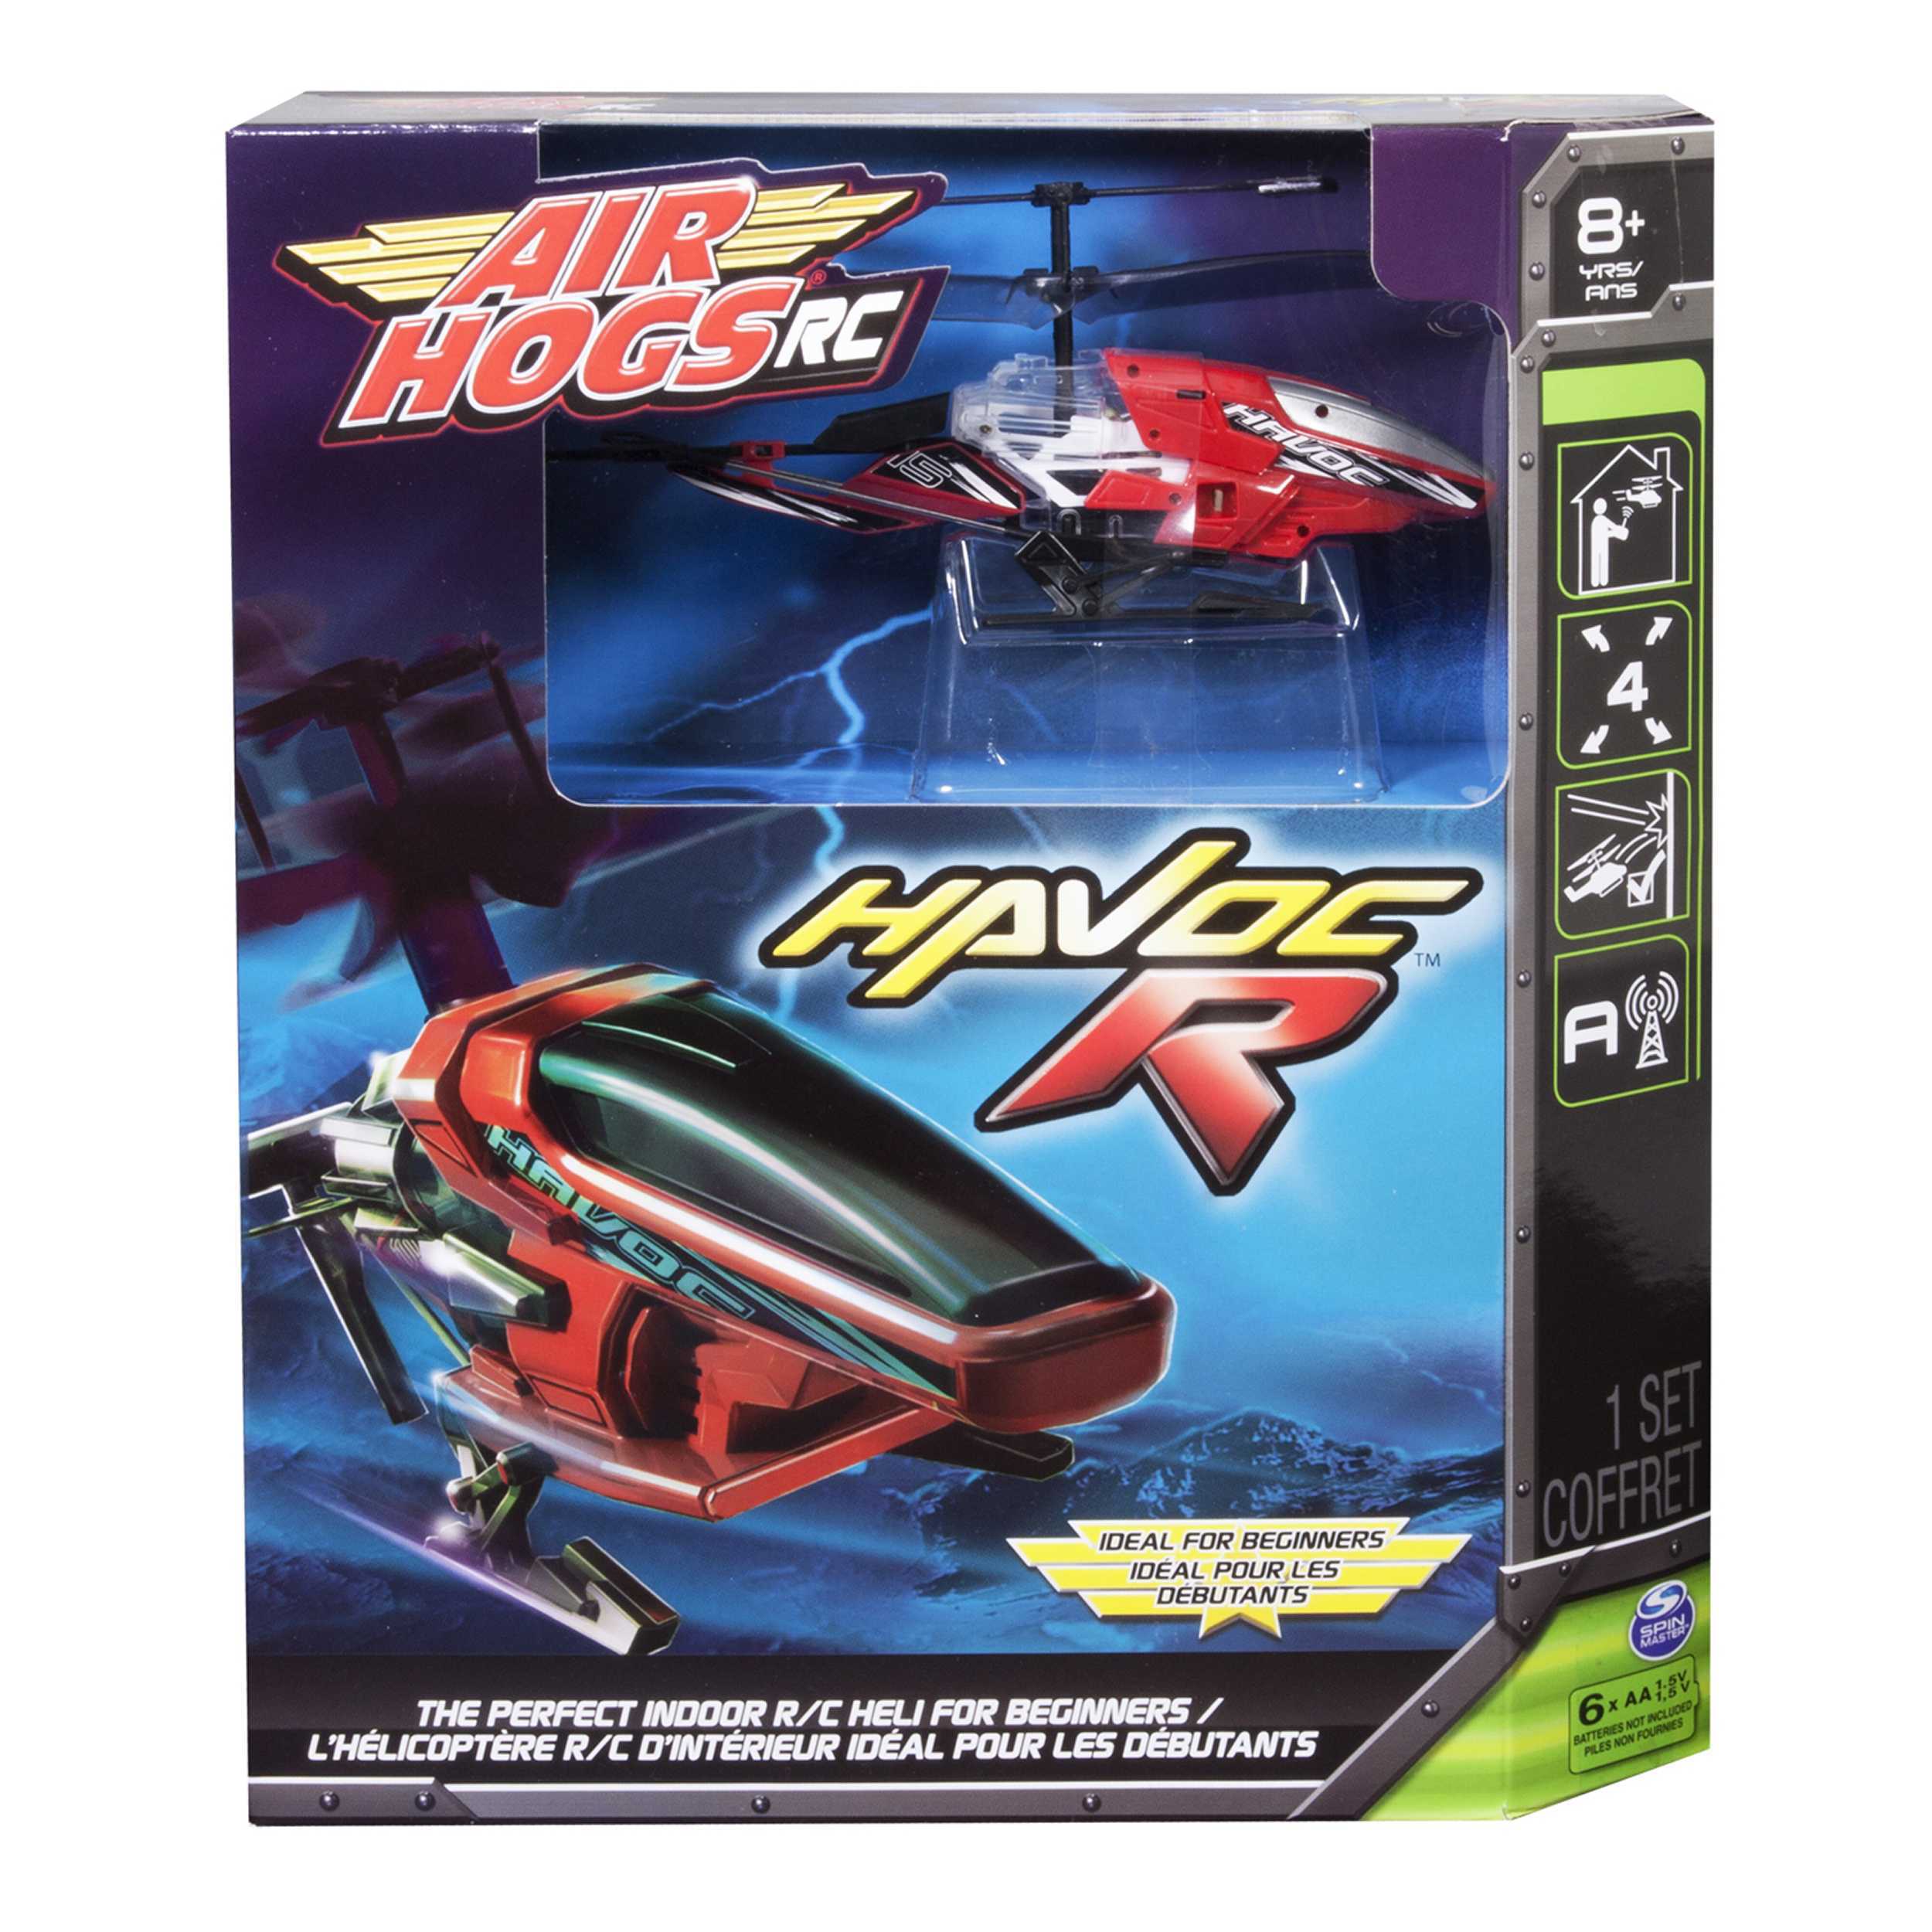 Air Hogs RC Havoc Helicopter- Remote Control Toy Helicopter - image 2 of 3